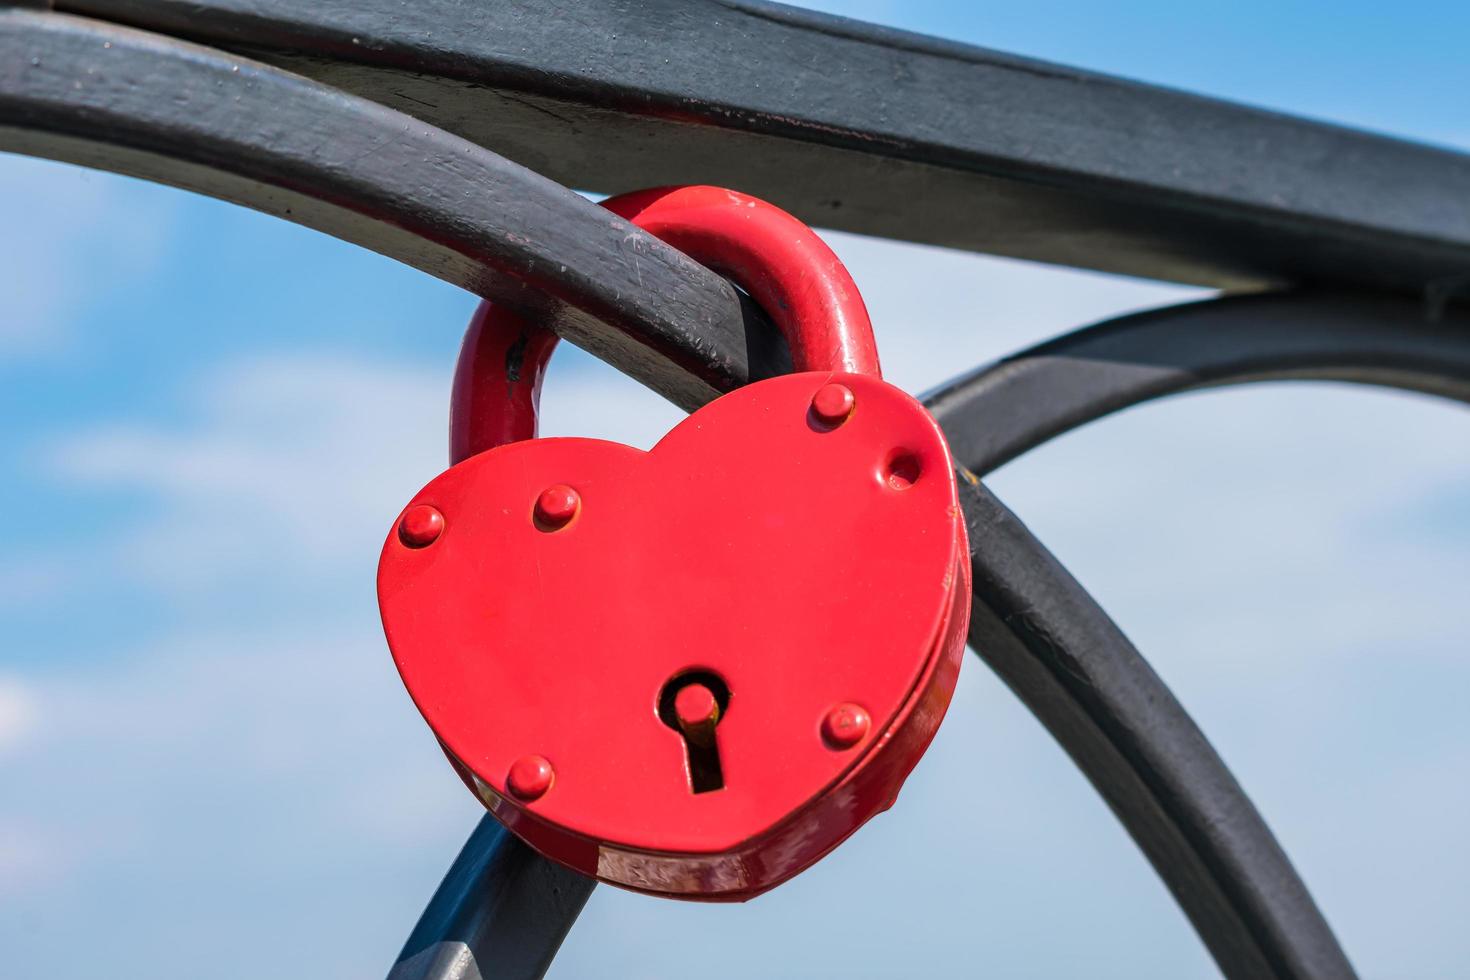 The tradition of hanging a padlock on the railing of a bridge as a symbol of love photo